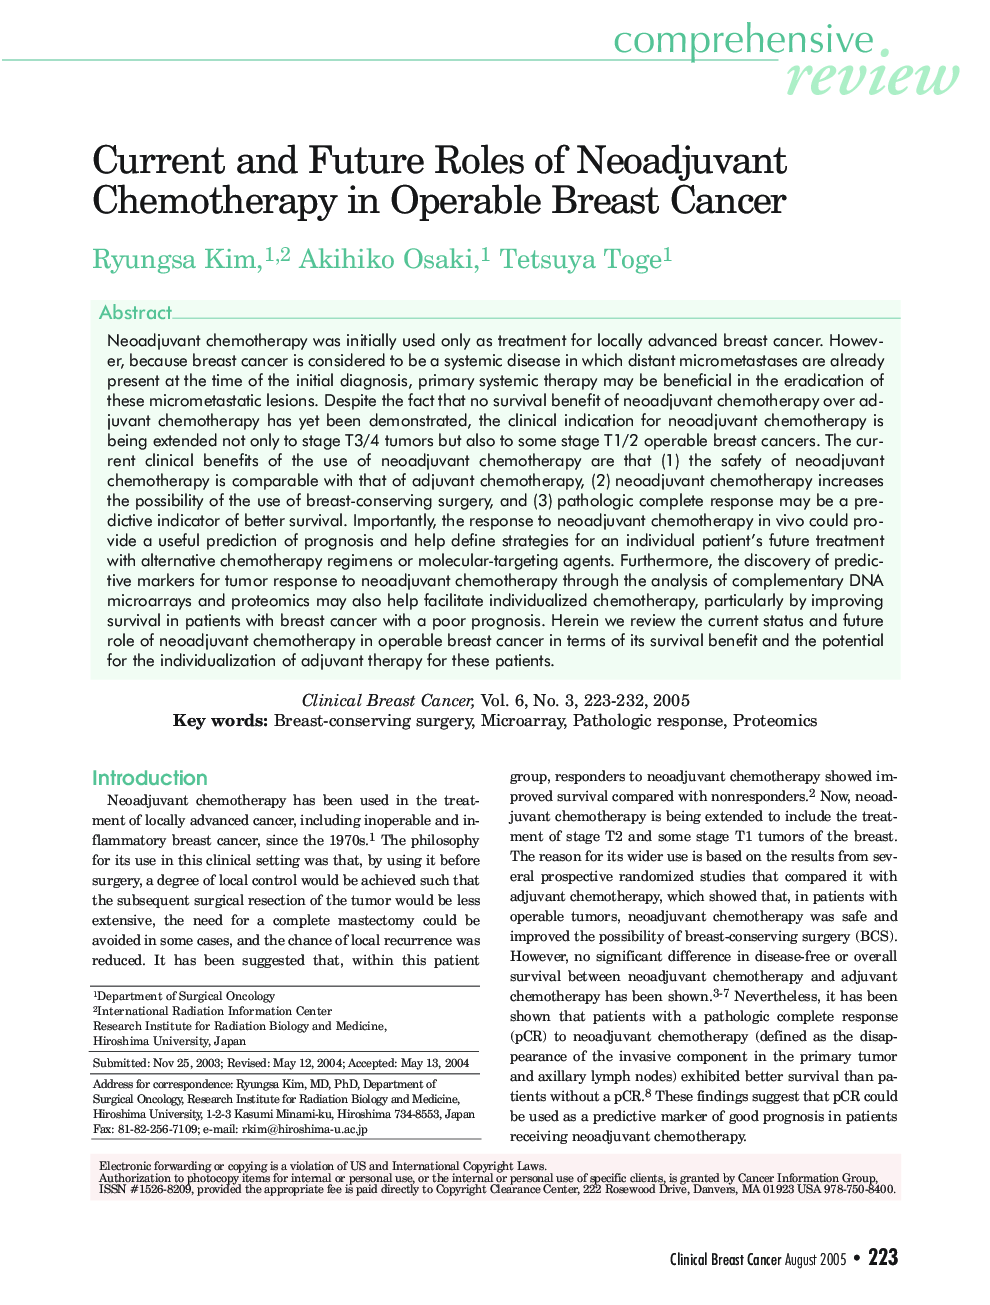 Current and Future Roles of Neoadjuvant Chemotherapy in Operable Breast Cancer